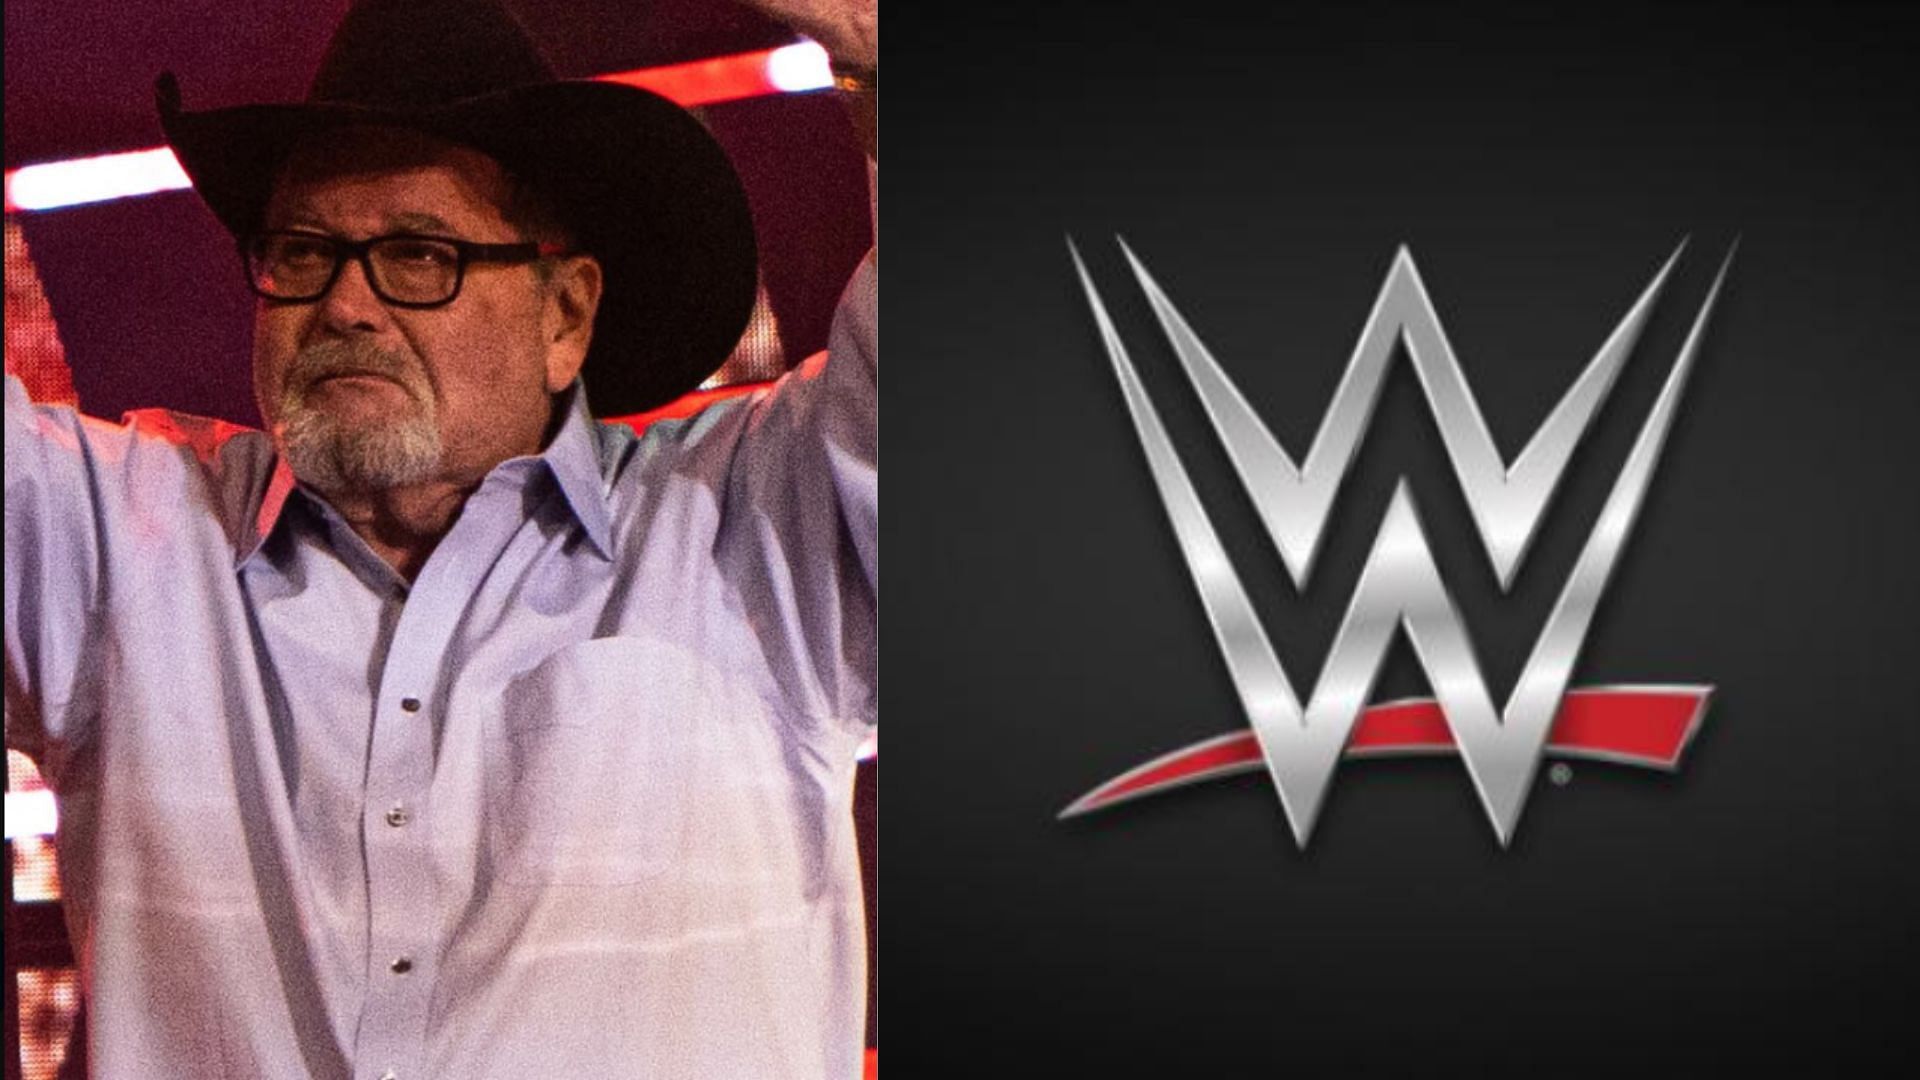 Jim Ross has been signed with AEW since 2019 [Image Credits: Ross